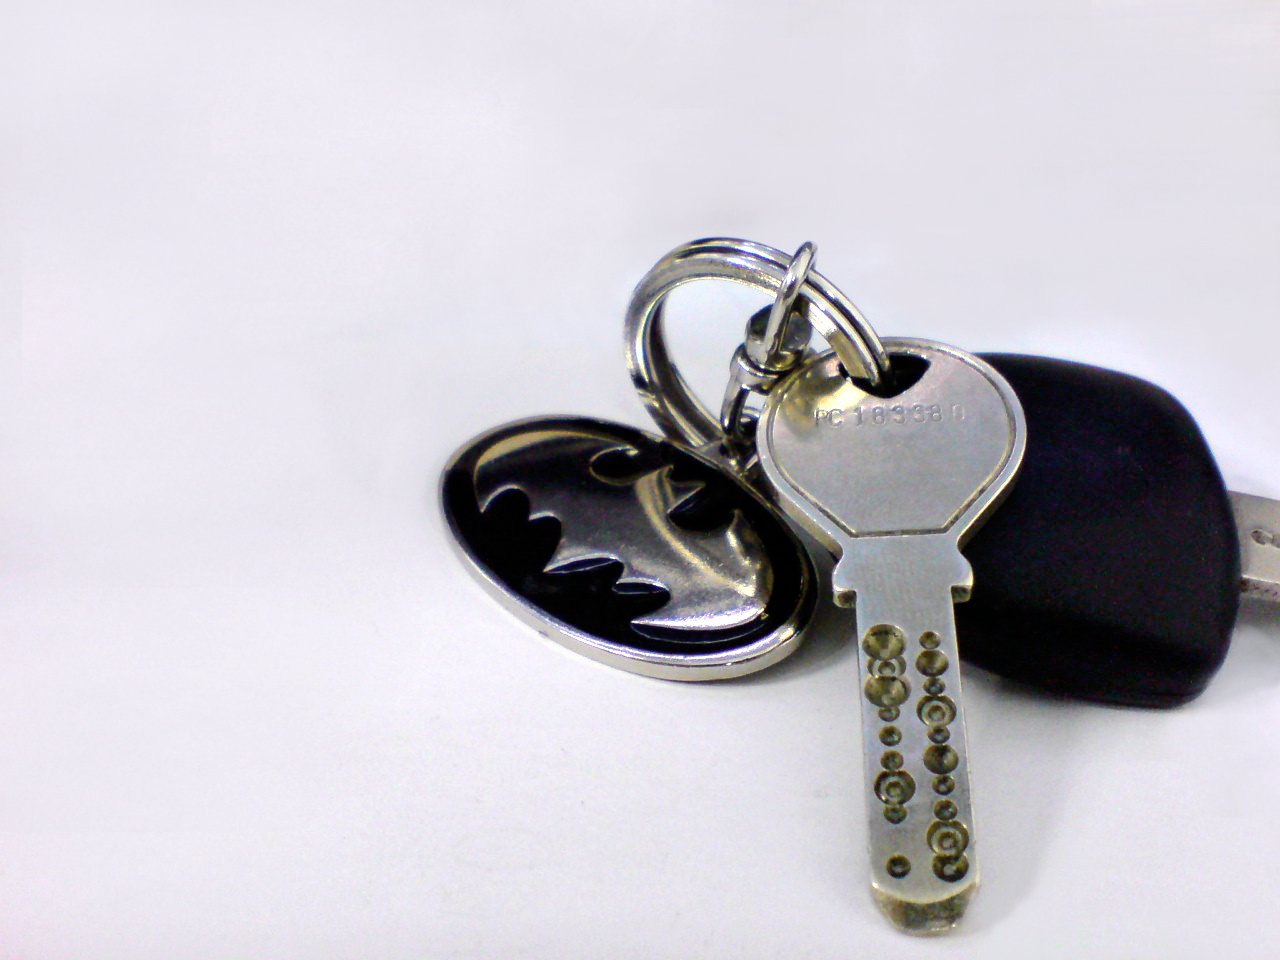 there is a key with a house on it and a car keychain